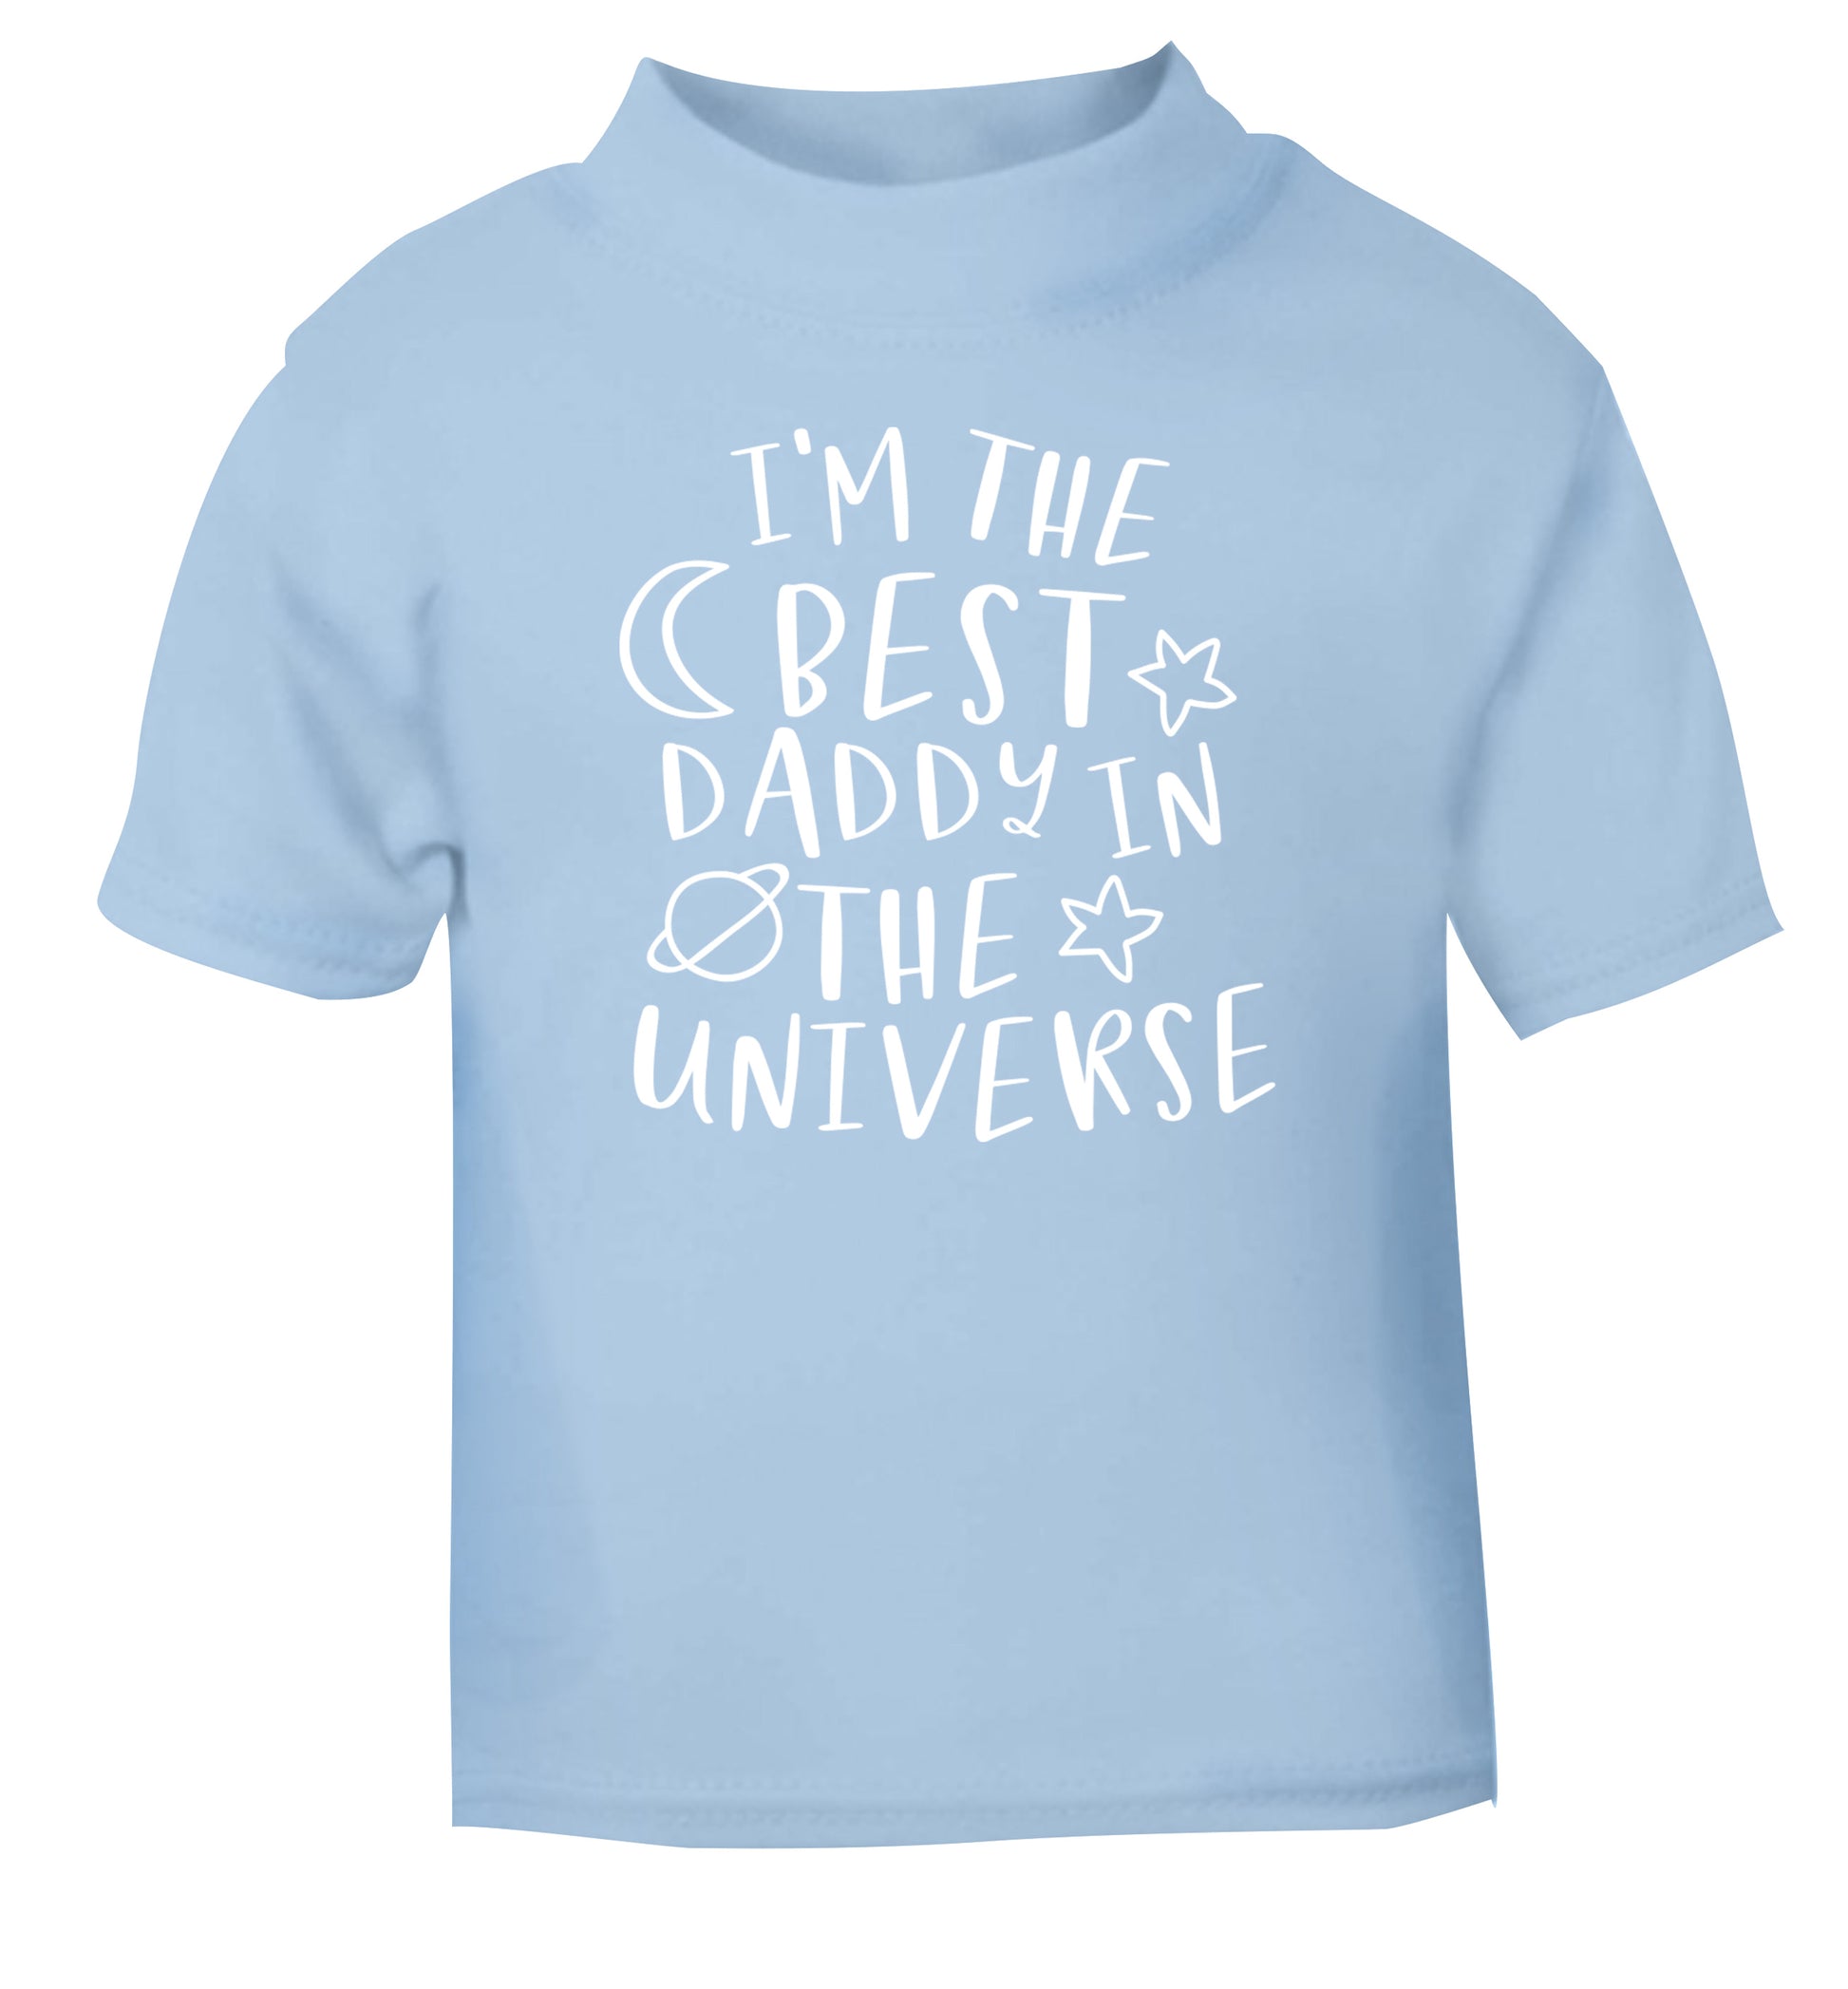 I'm the best daddy in the universe light blue Baby Toddler Tshirt 2 Years